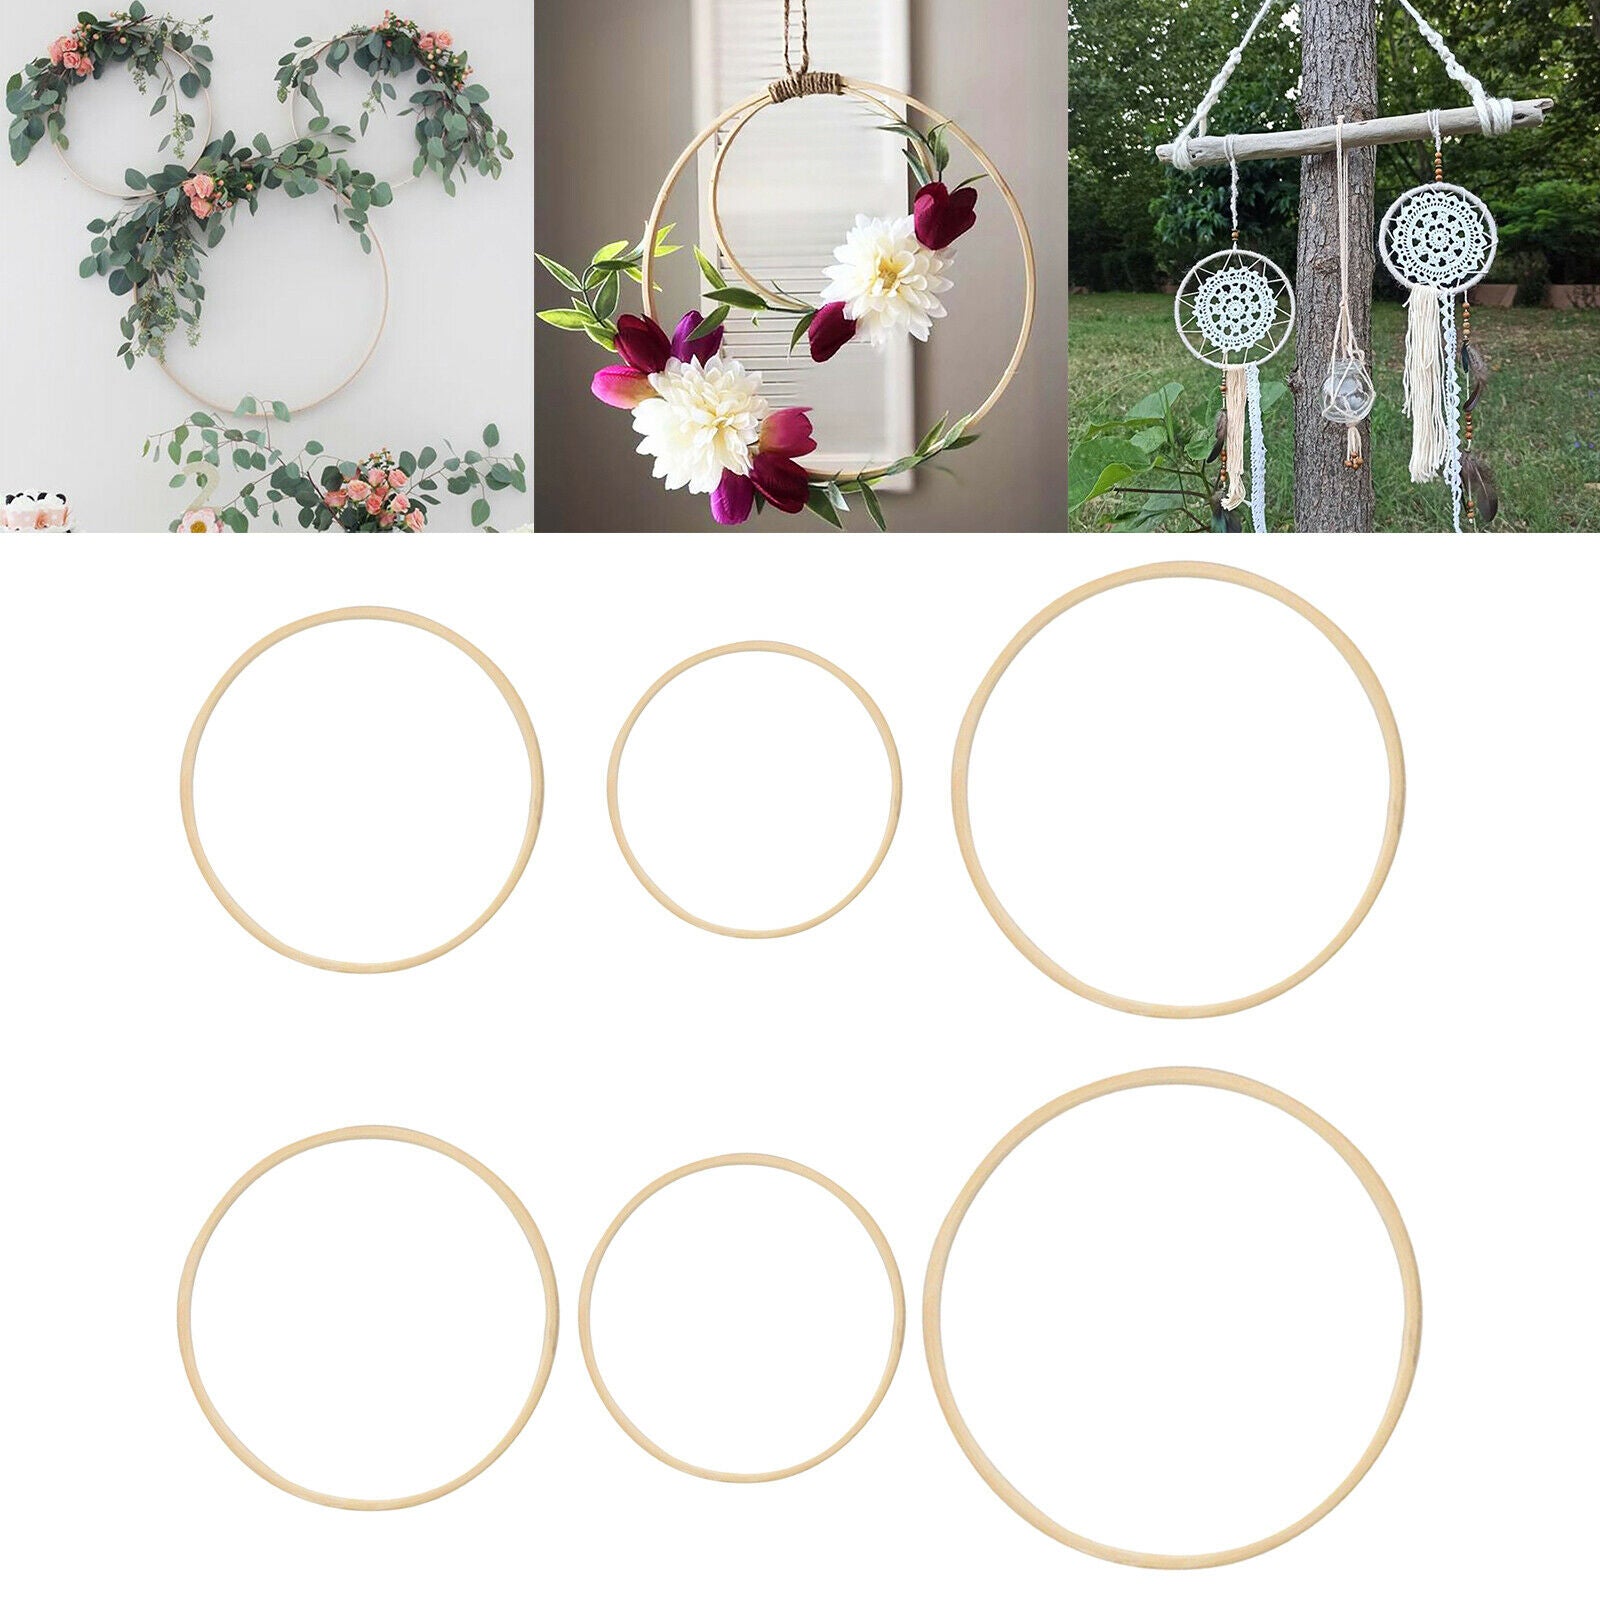 6Pcs Wooden Embroidery Hoops Bamboo Macrame Ring Frame for Dreamcatcher Wedding